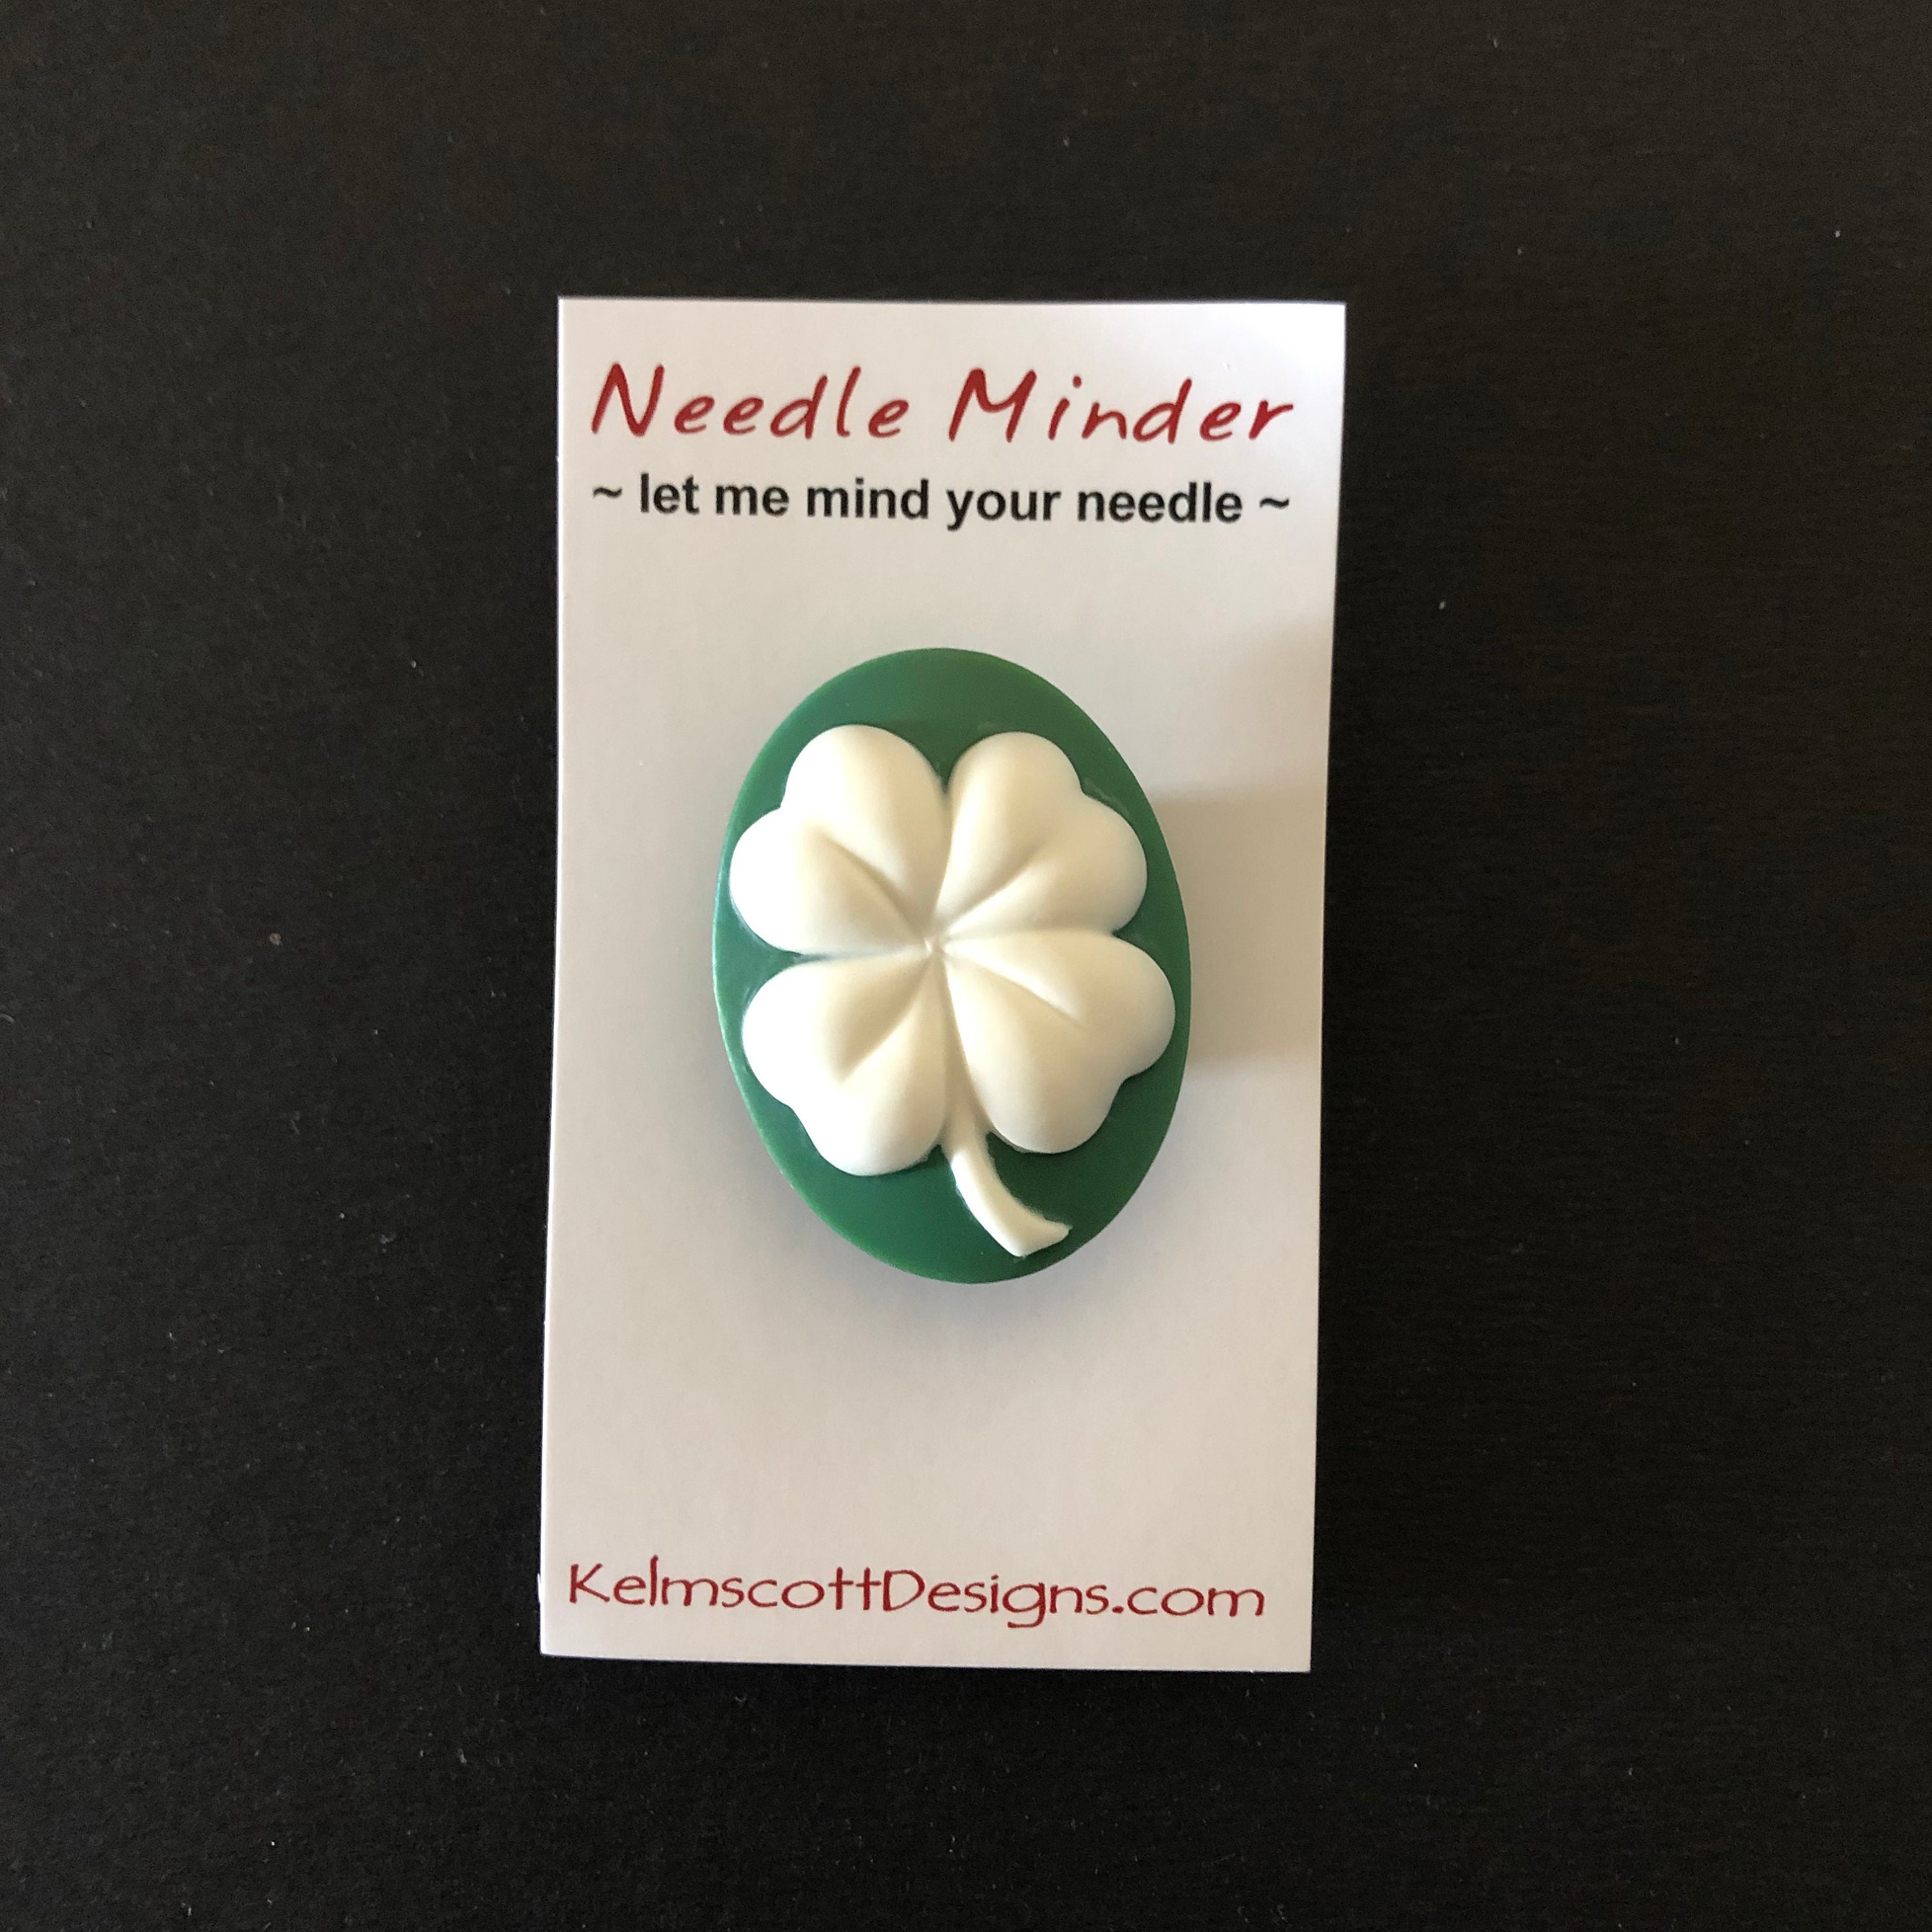 How To Make A Needle Minder